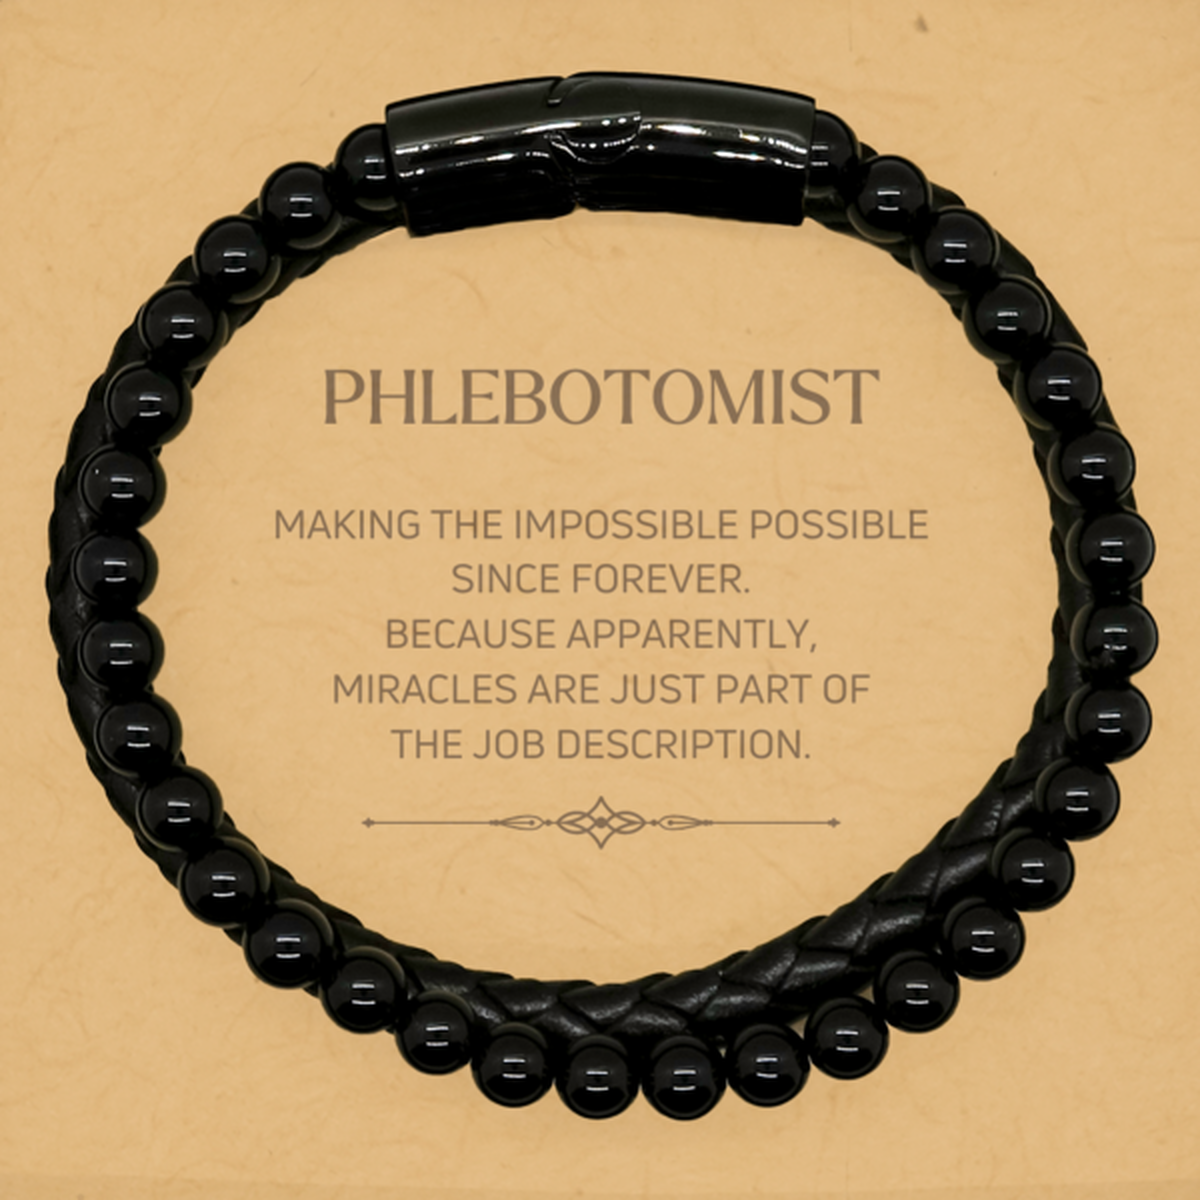 Funny Phlebotomist Gifts, Miracles are just part of the job description, Inspirational Birthday Stone Leather Bracelets For Phlebotomist, Men, Women, Coworkers, Friends, Boss